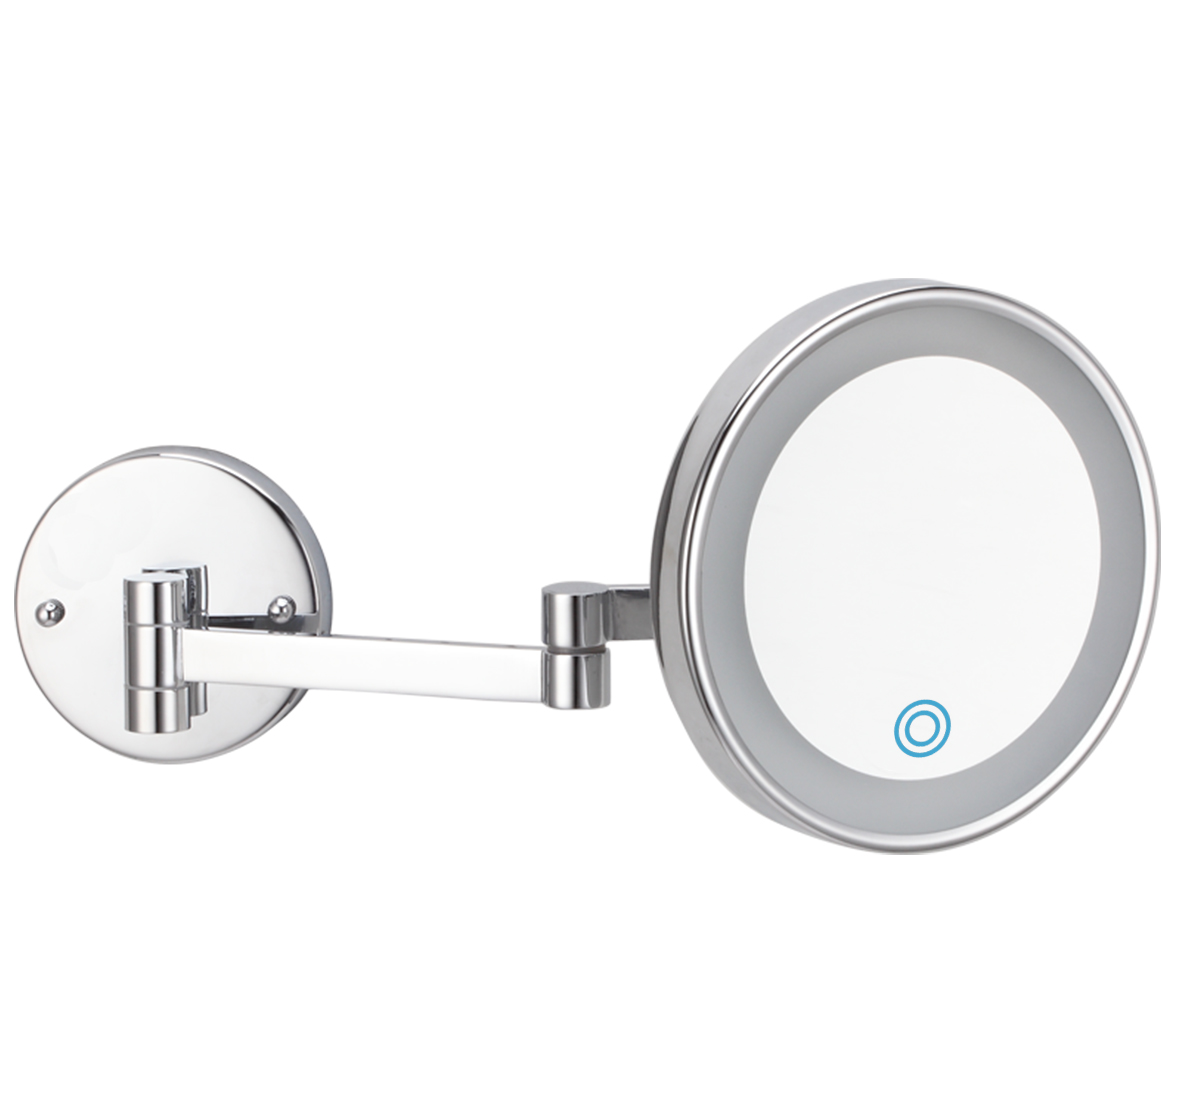 Silver Round Wall Mounted Mirror
